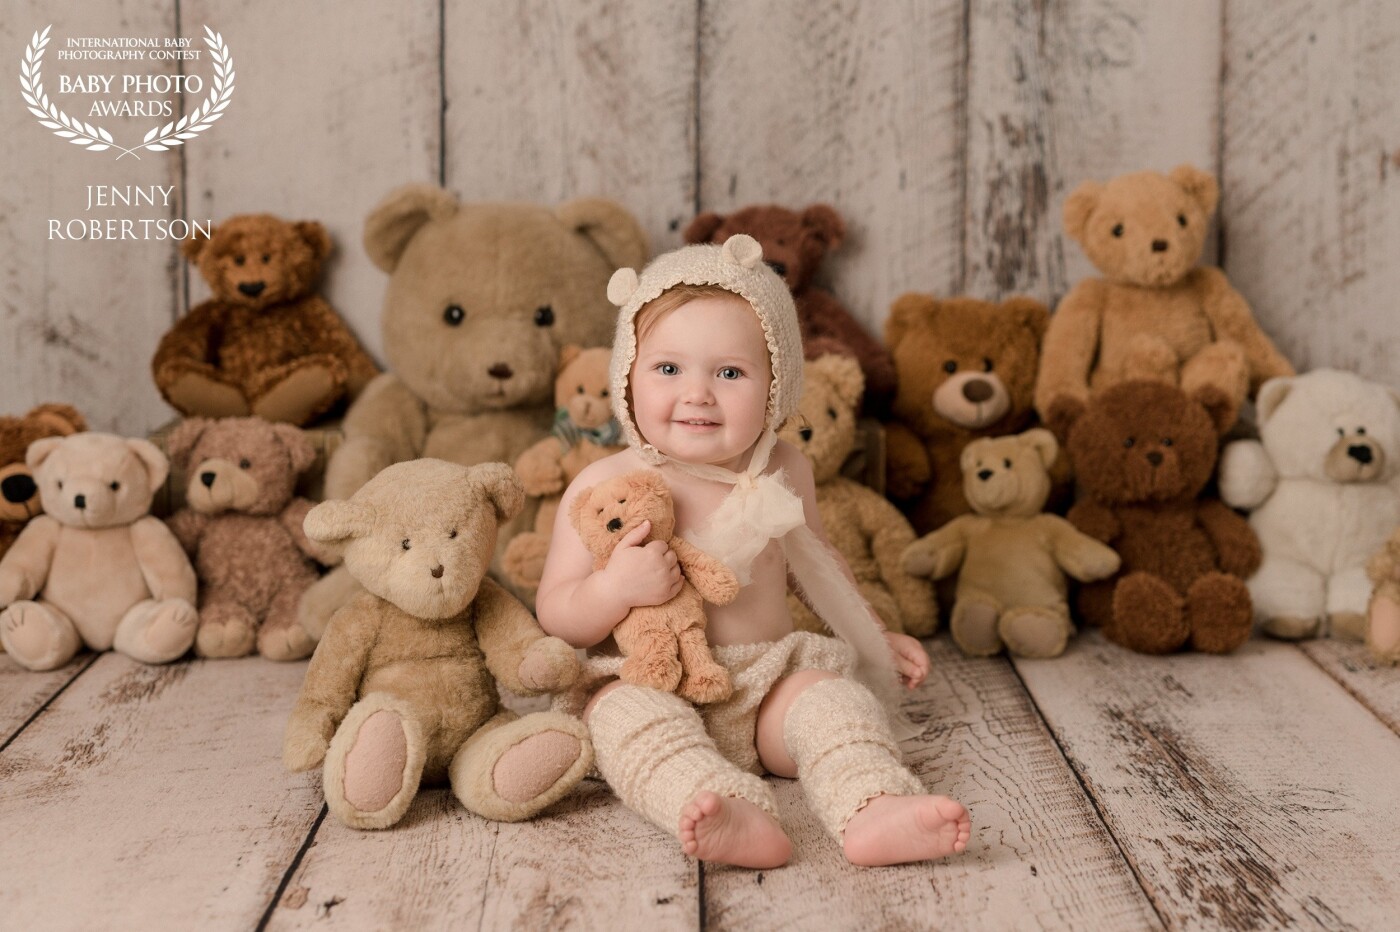 They call her Clare Bear! Clare's mother asked if we could incorporate teddy bears into her photoshoot. Some of these belonged to Clare's parents when they were kids.